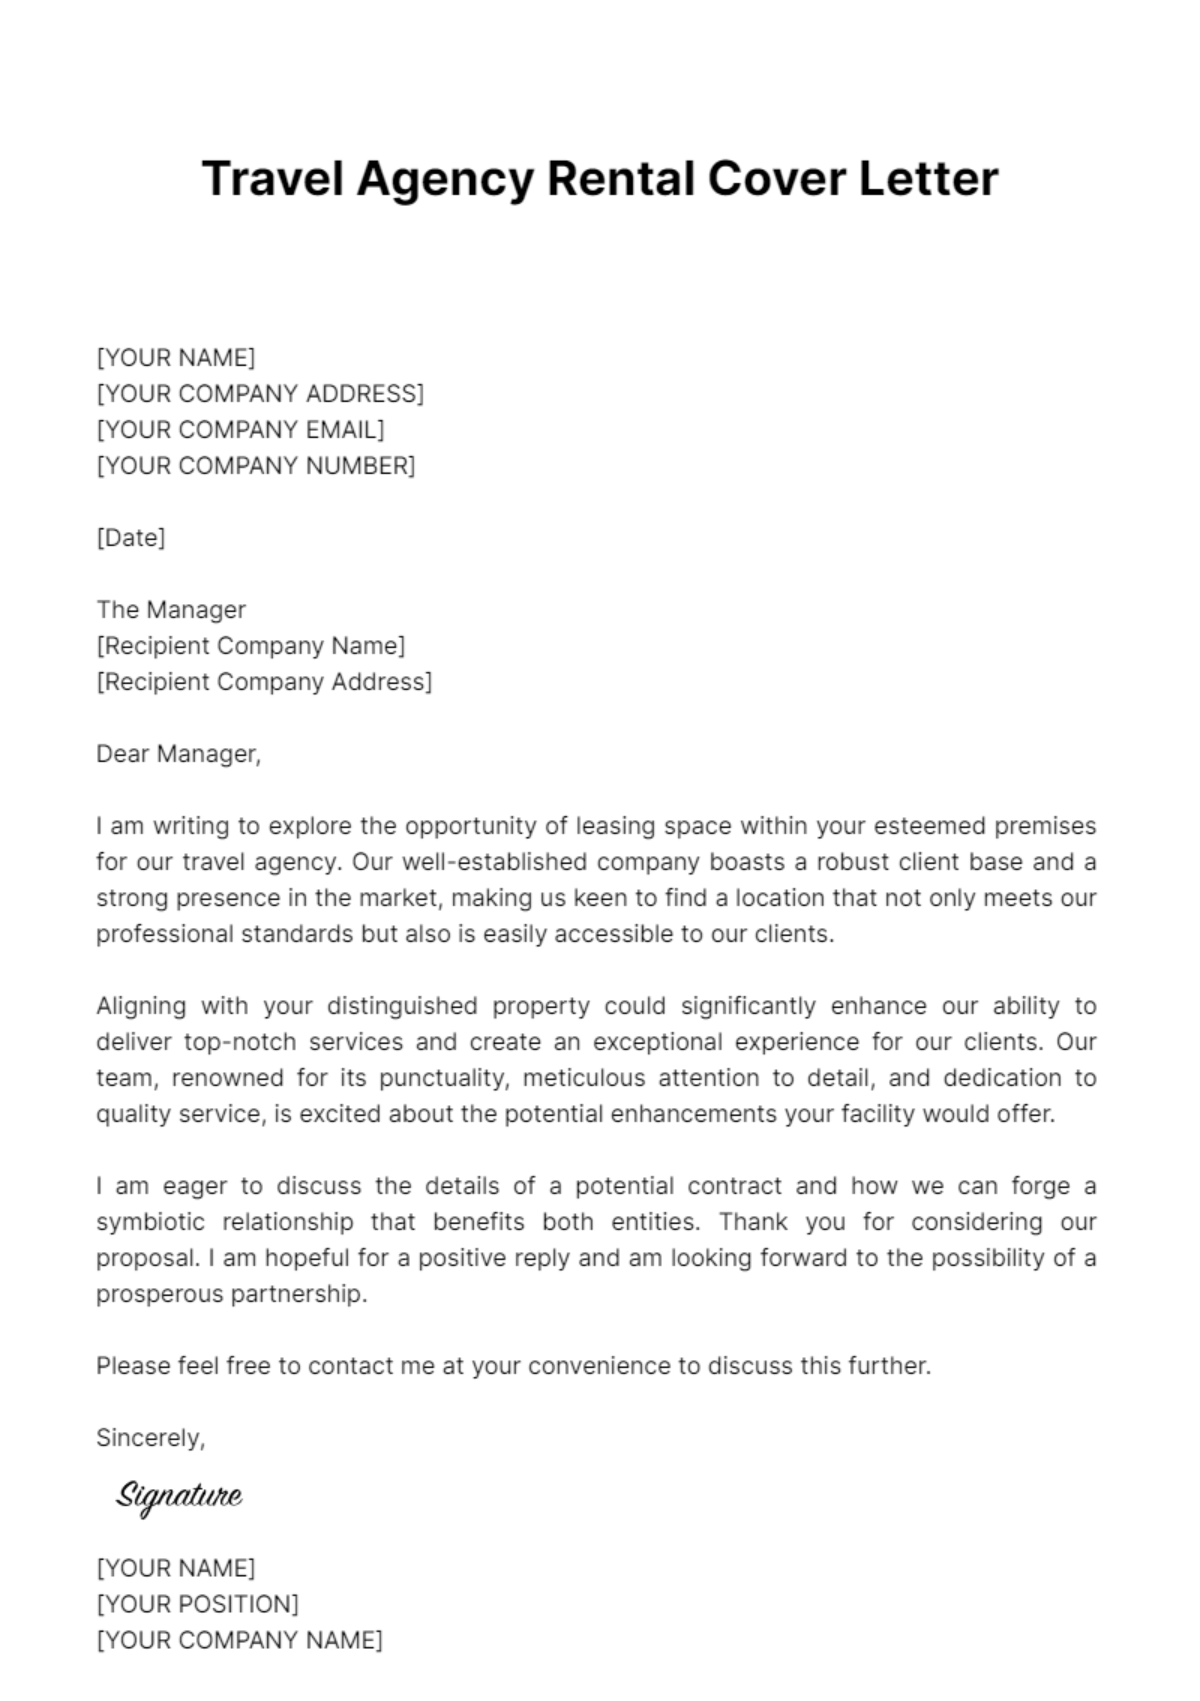 Free Travel Agency Rental Cover Letter Template